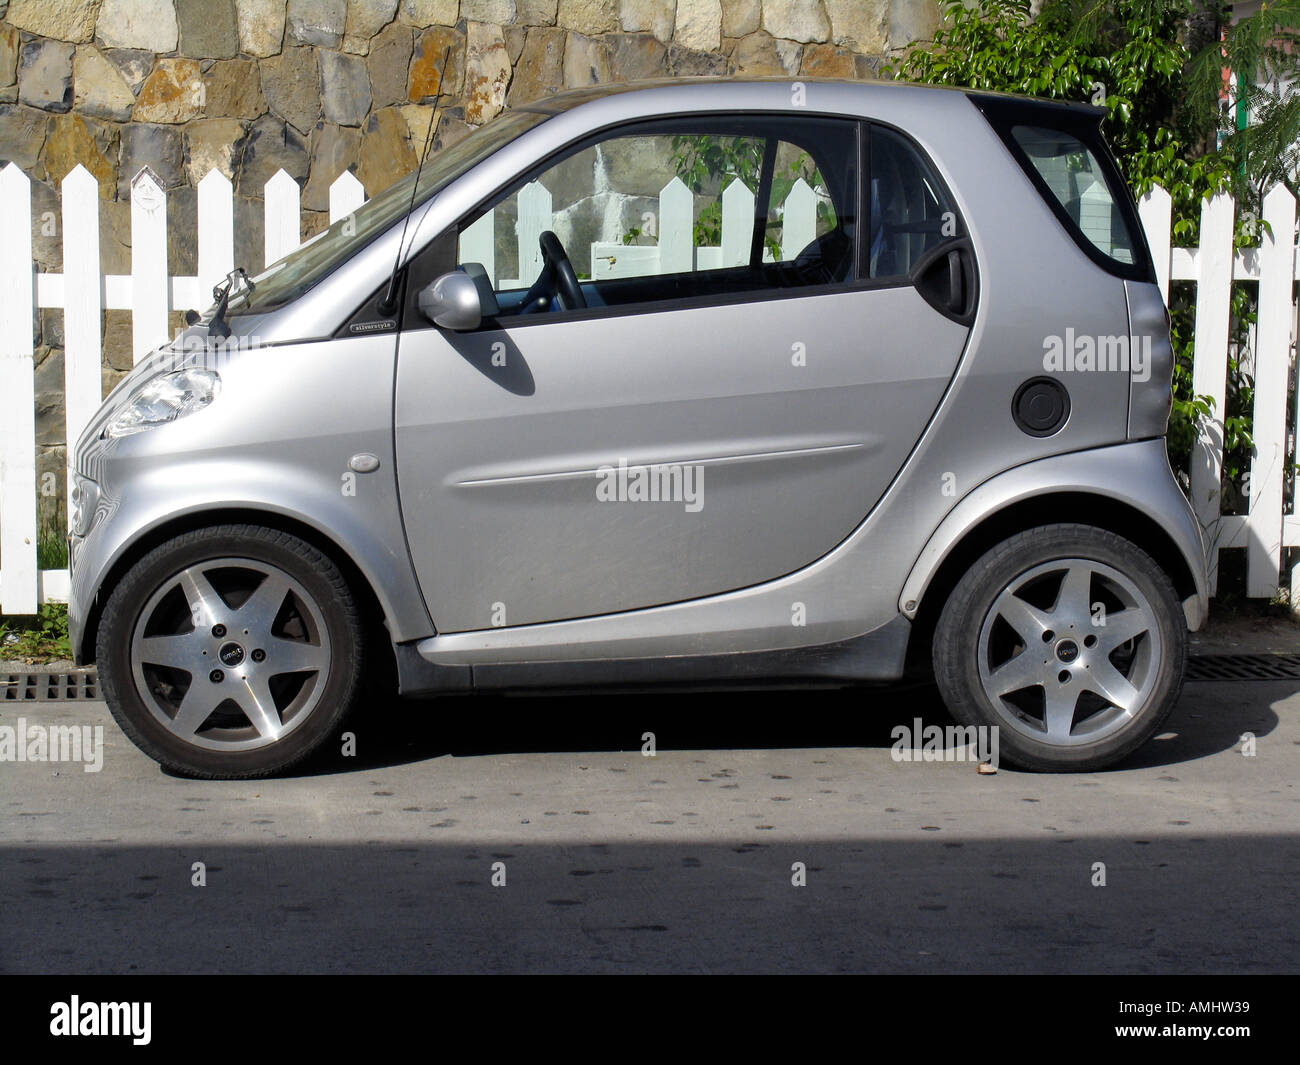 Smart Cars are popular on island of St Barts Stock Photo